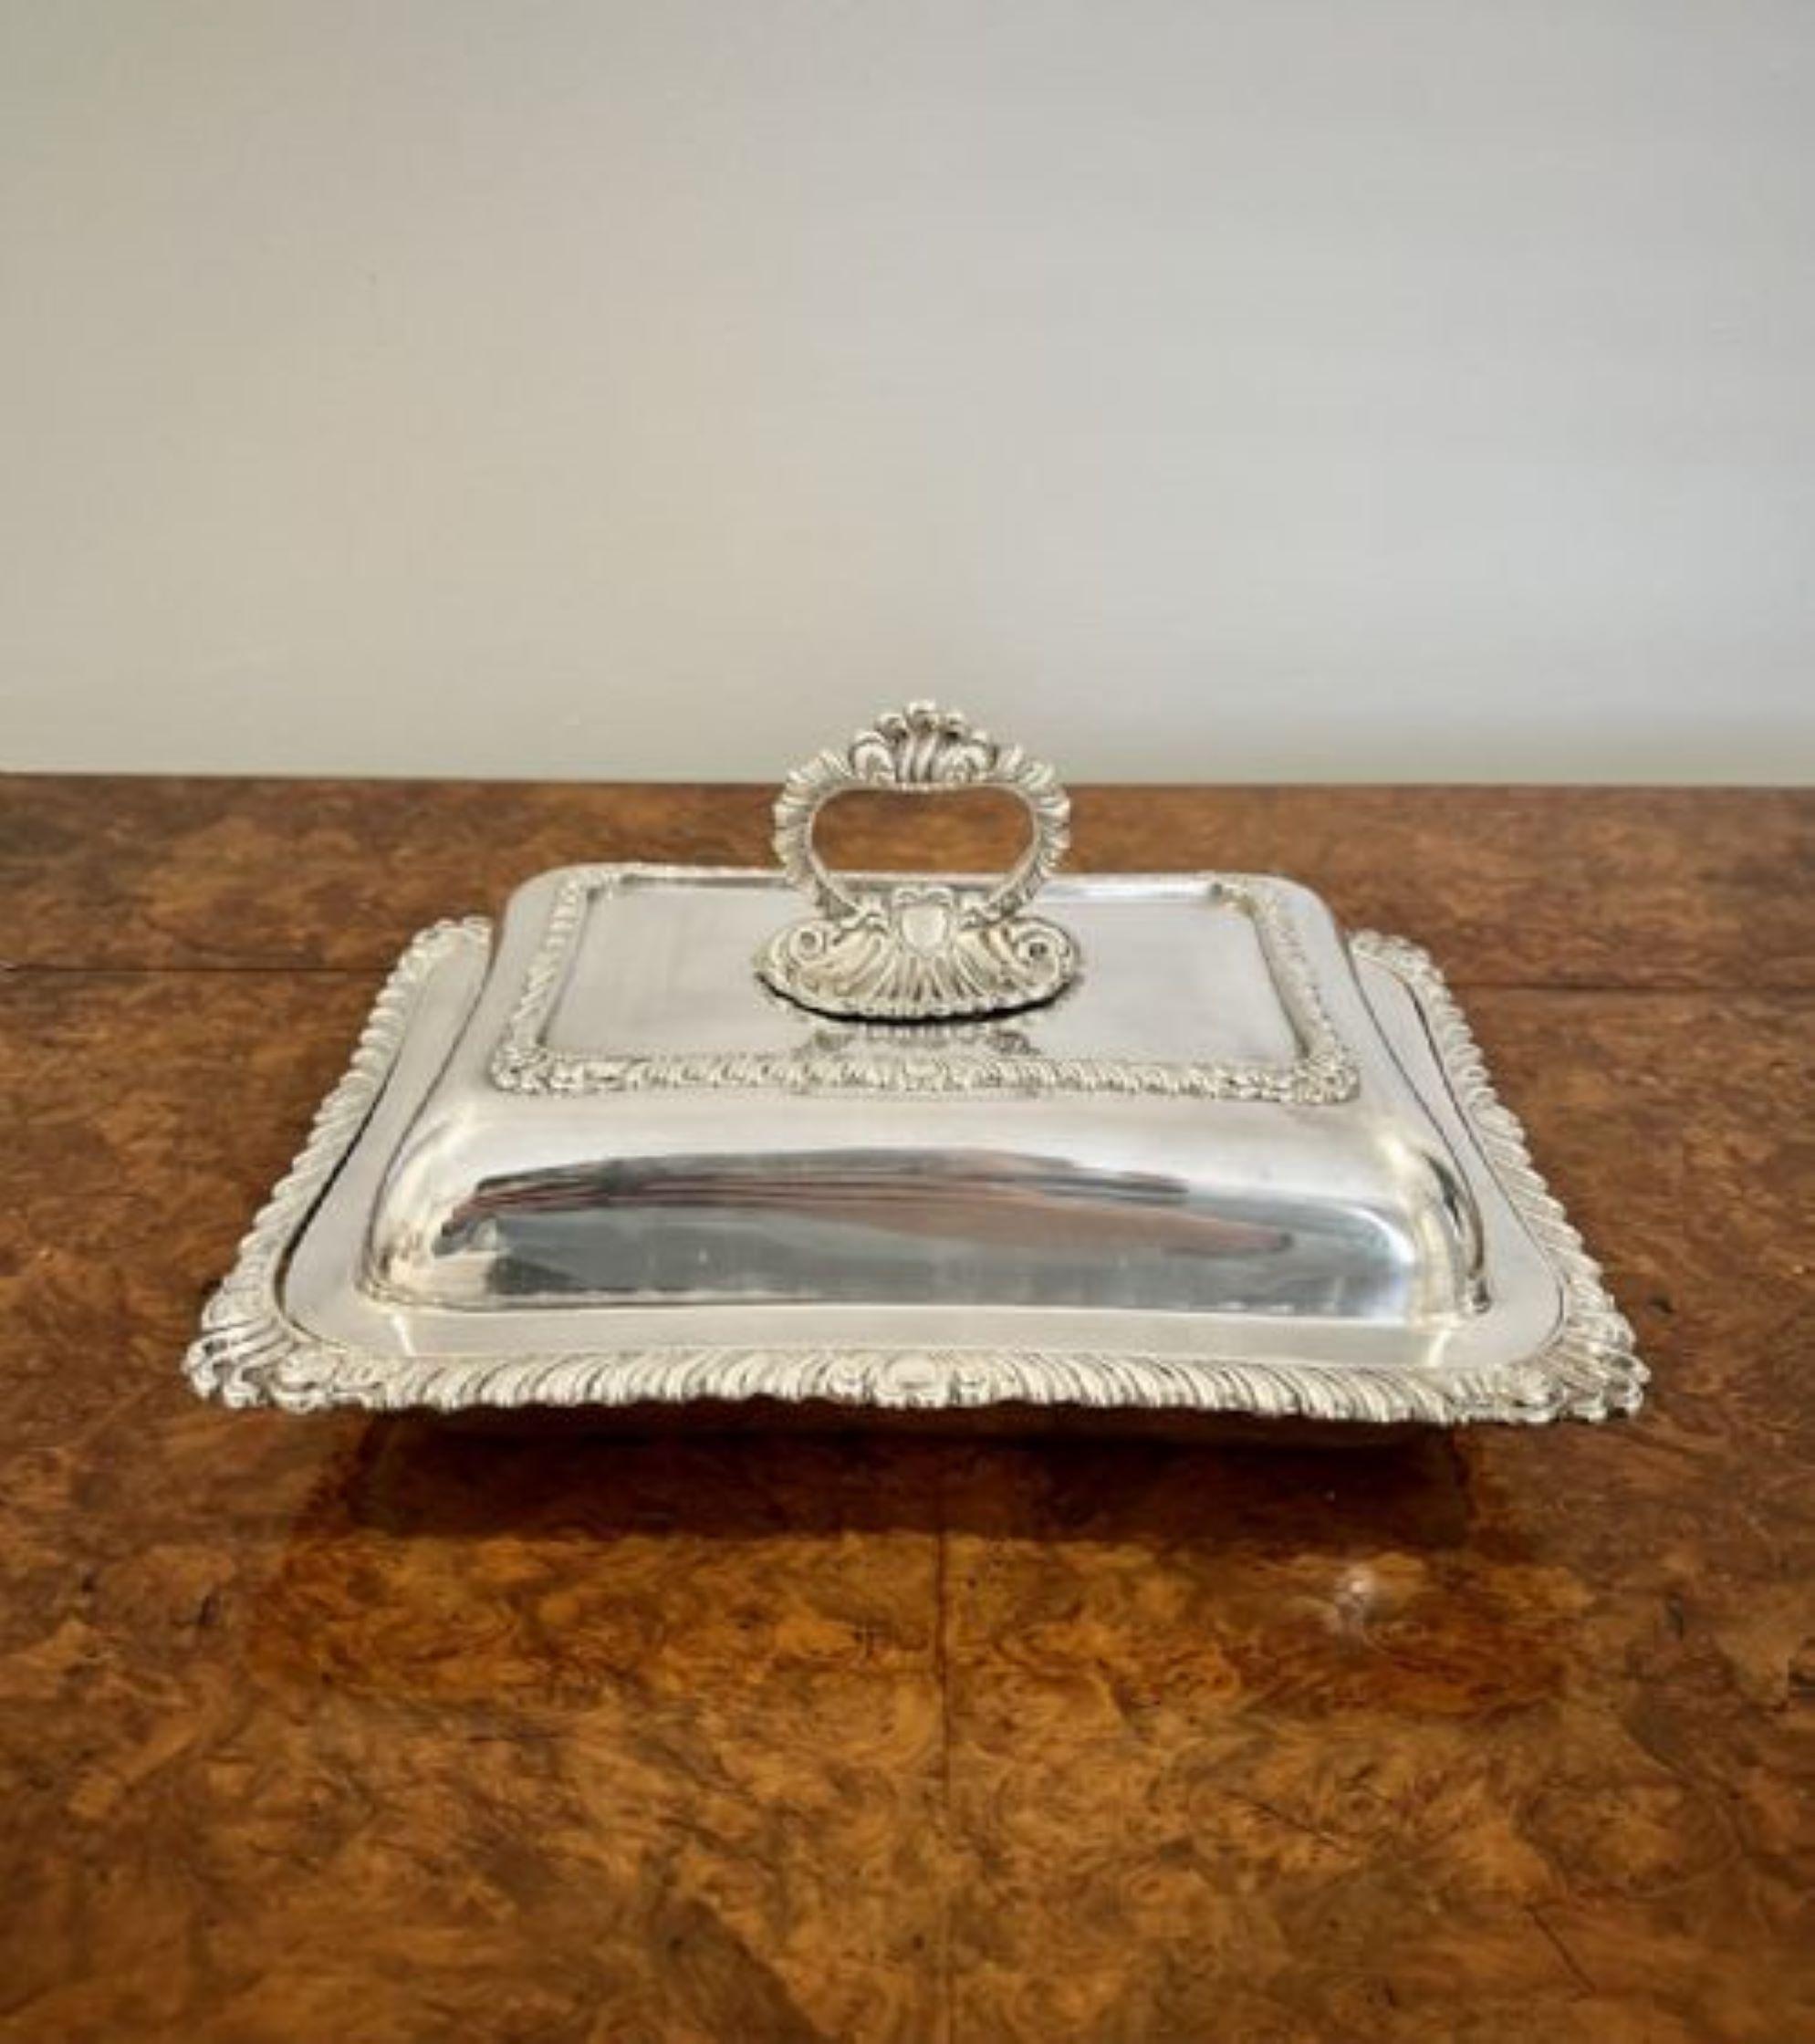 Antique Edwardian quality ornate silver plated rectangular entrée dish having a quality rectangular silver plated entrée dish with a lift off lid and removable ornate handle 